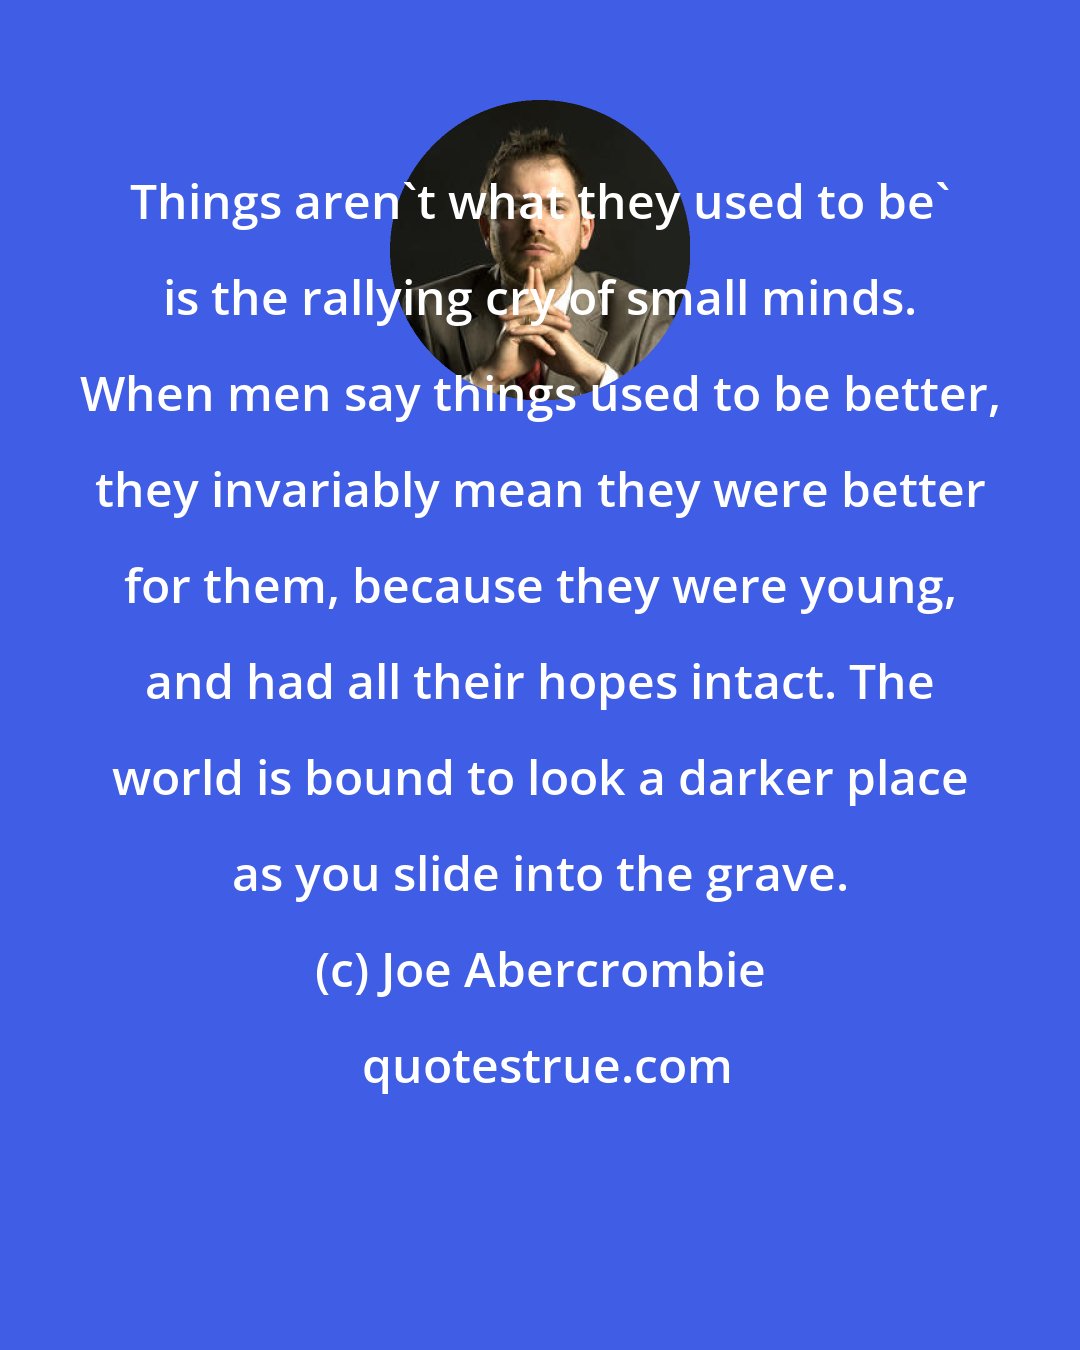 Joe Abercrombie: Things aren't what they used to be' is the rallying cry of small minds. When men say things used to be better, they invariably mean they were better for them, because they were young, and had all their hopes intact. The world is bound to look a darker place as you slide into the grave.